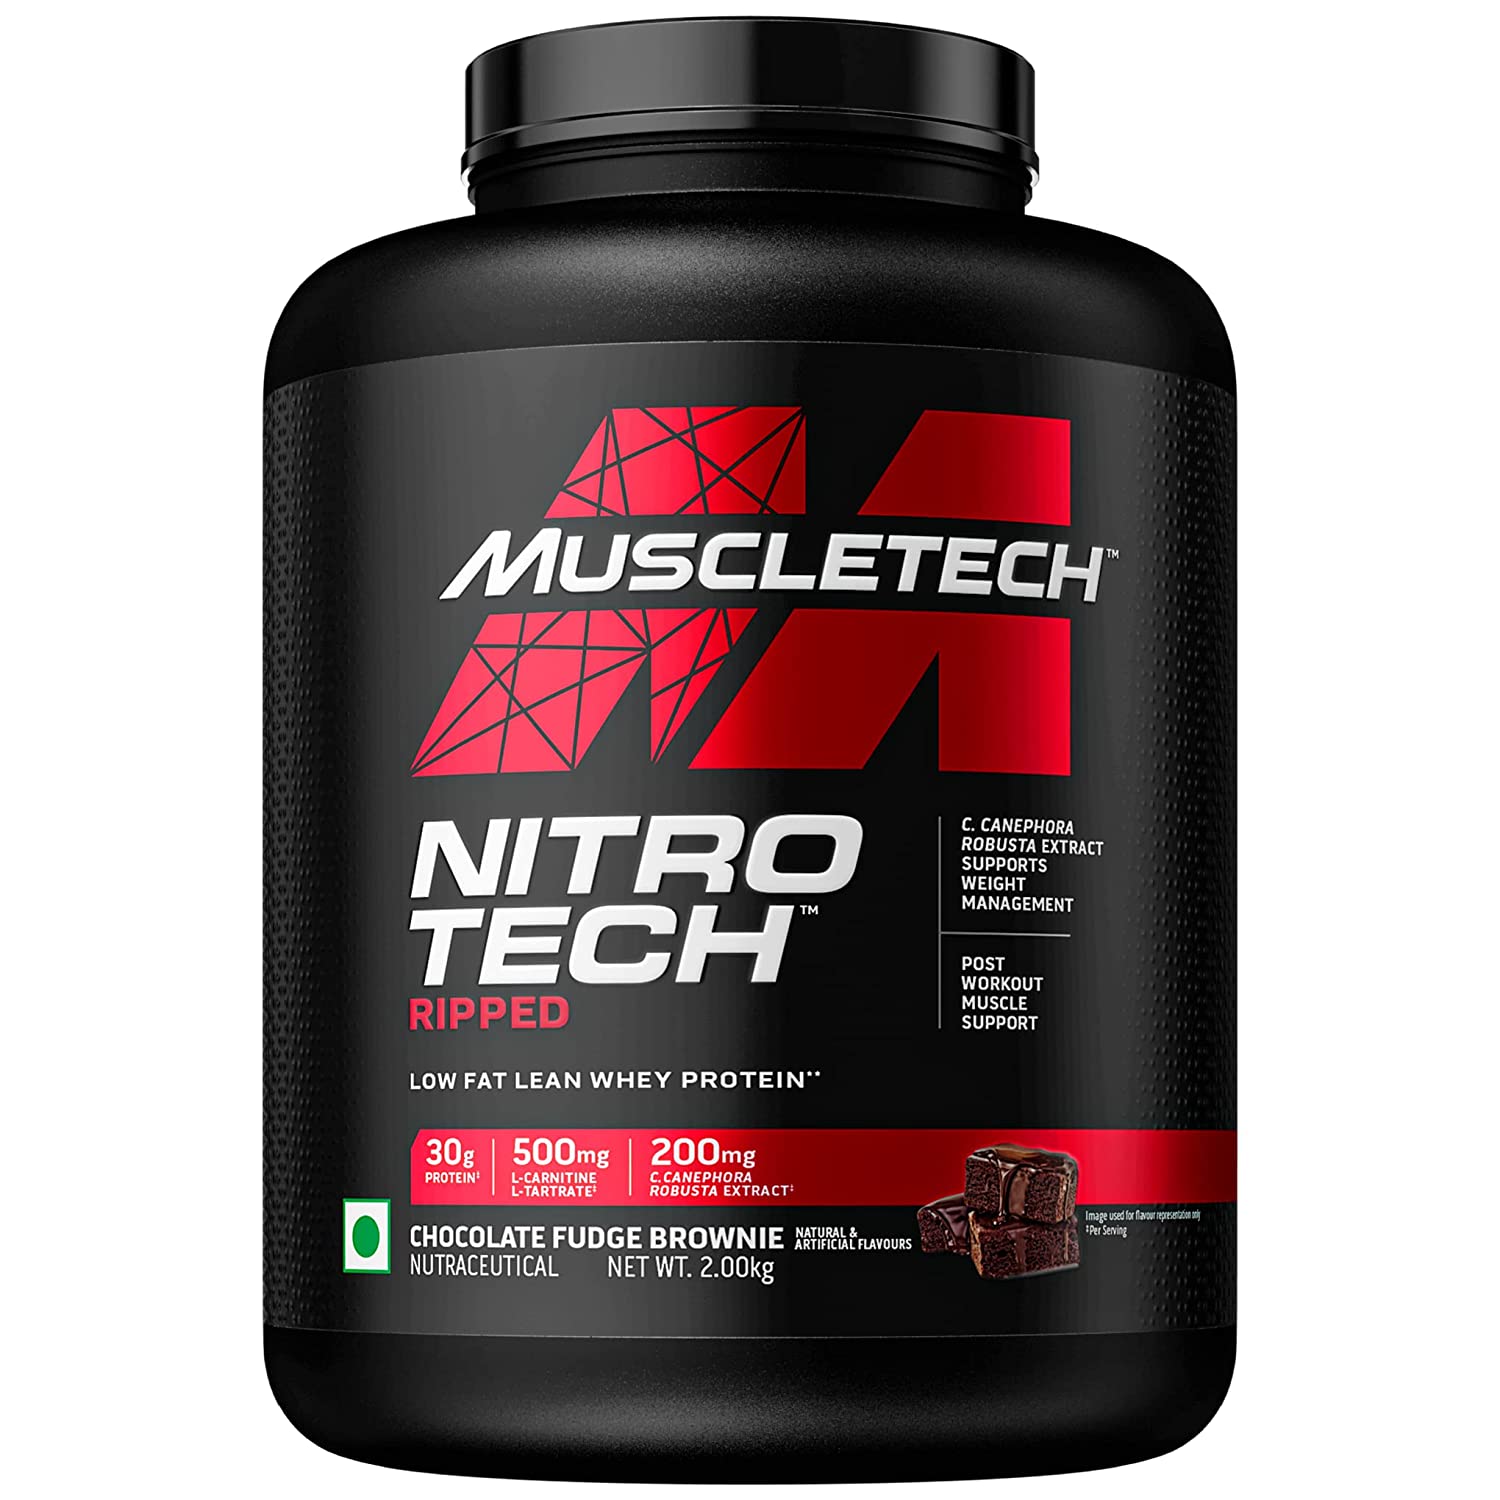 Muscletech Nitrotech Ripped Low Fat Lean Whey Protein + Stainless Steel Free 